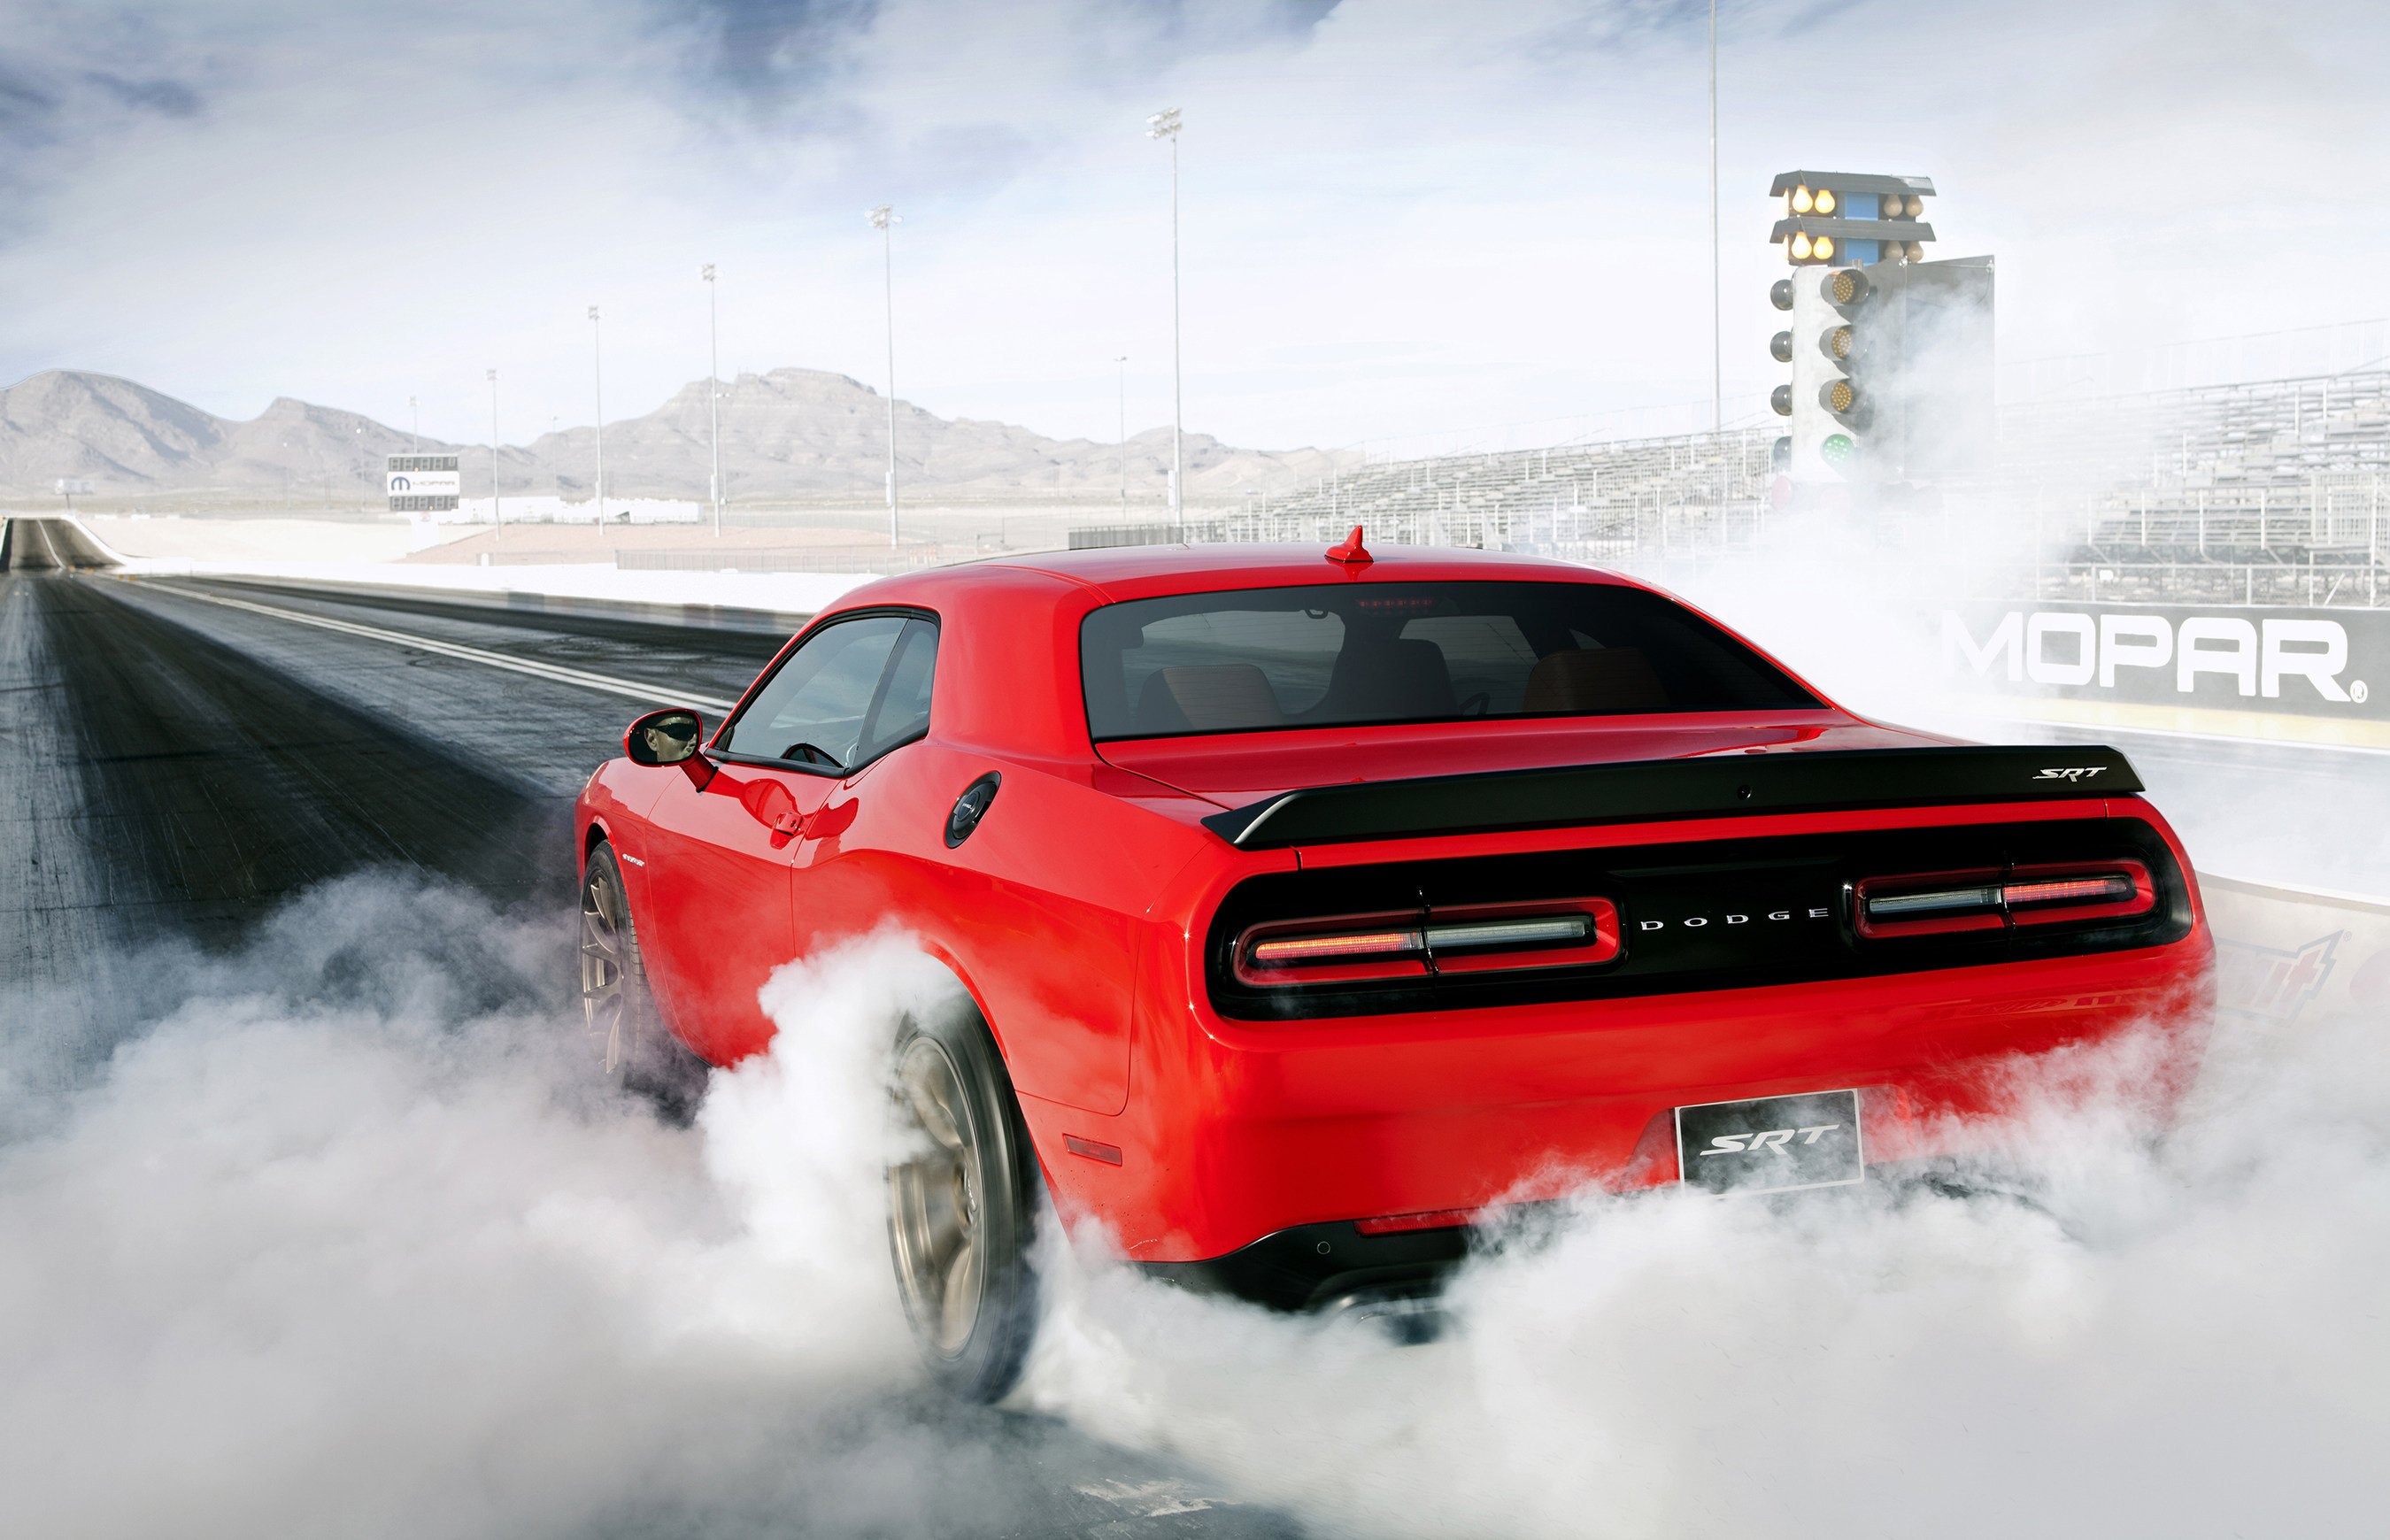 The 2015 Dodge Challenger SRT Hellcat is the fastest muscle car ever with a National Hot Rod Association-certified 1/4-mile elapsed time of 11.2 seconds at 125 miles per hour (mph) with stock Pirelli P275/40ZR20 P Zero tires. With drag radials, the run dropped to just 10.8 seconds at 126 mph!  The Dodge Challenger SRT Hellcat is also the most powerful muscle car ever with an unprecedented 707 horsepower and 650 lb.-ft. of torque. (PRNewsFoto/Chrysler Group LLC)